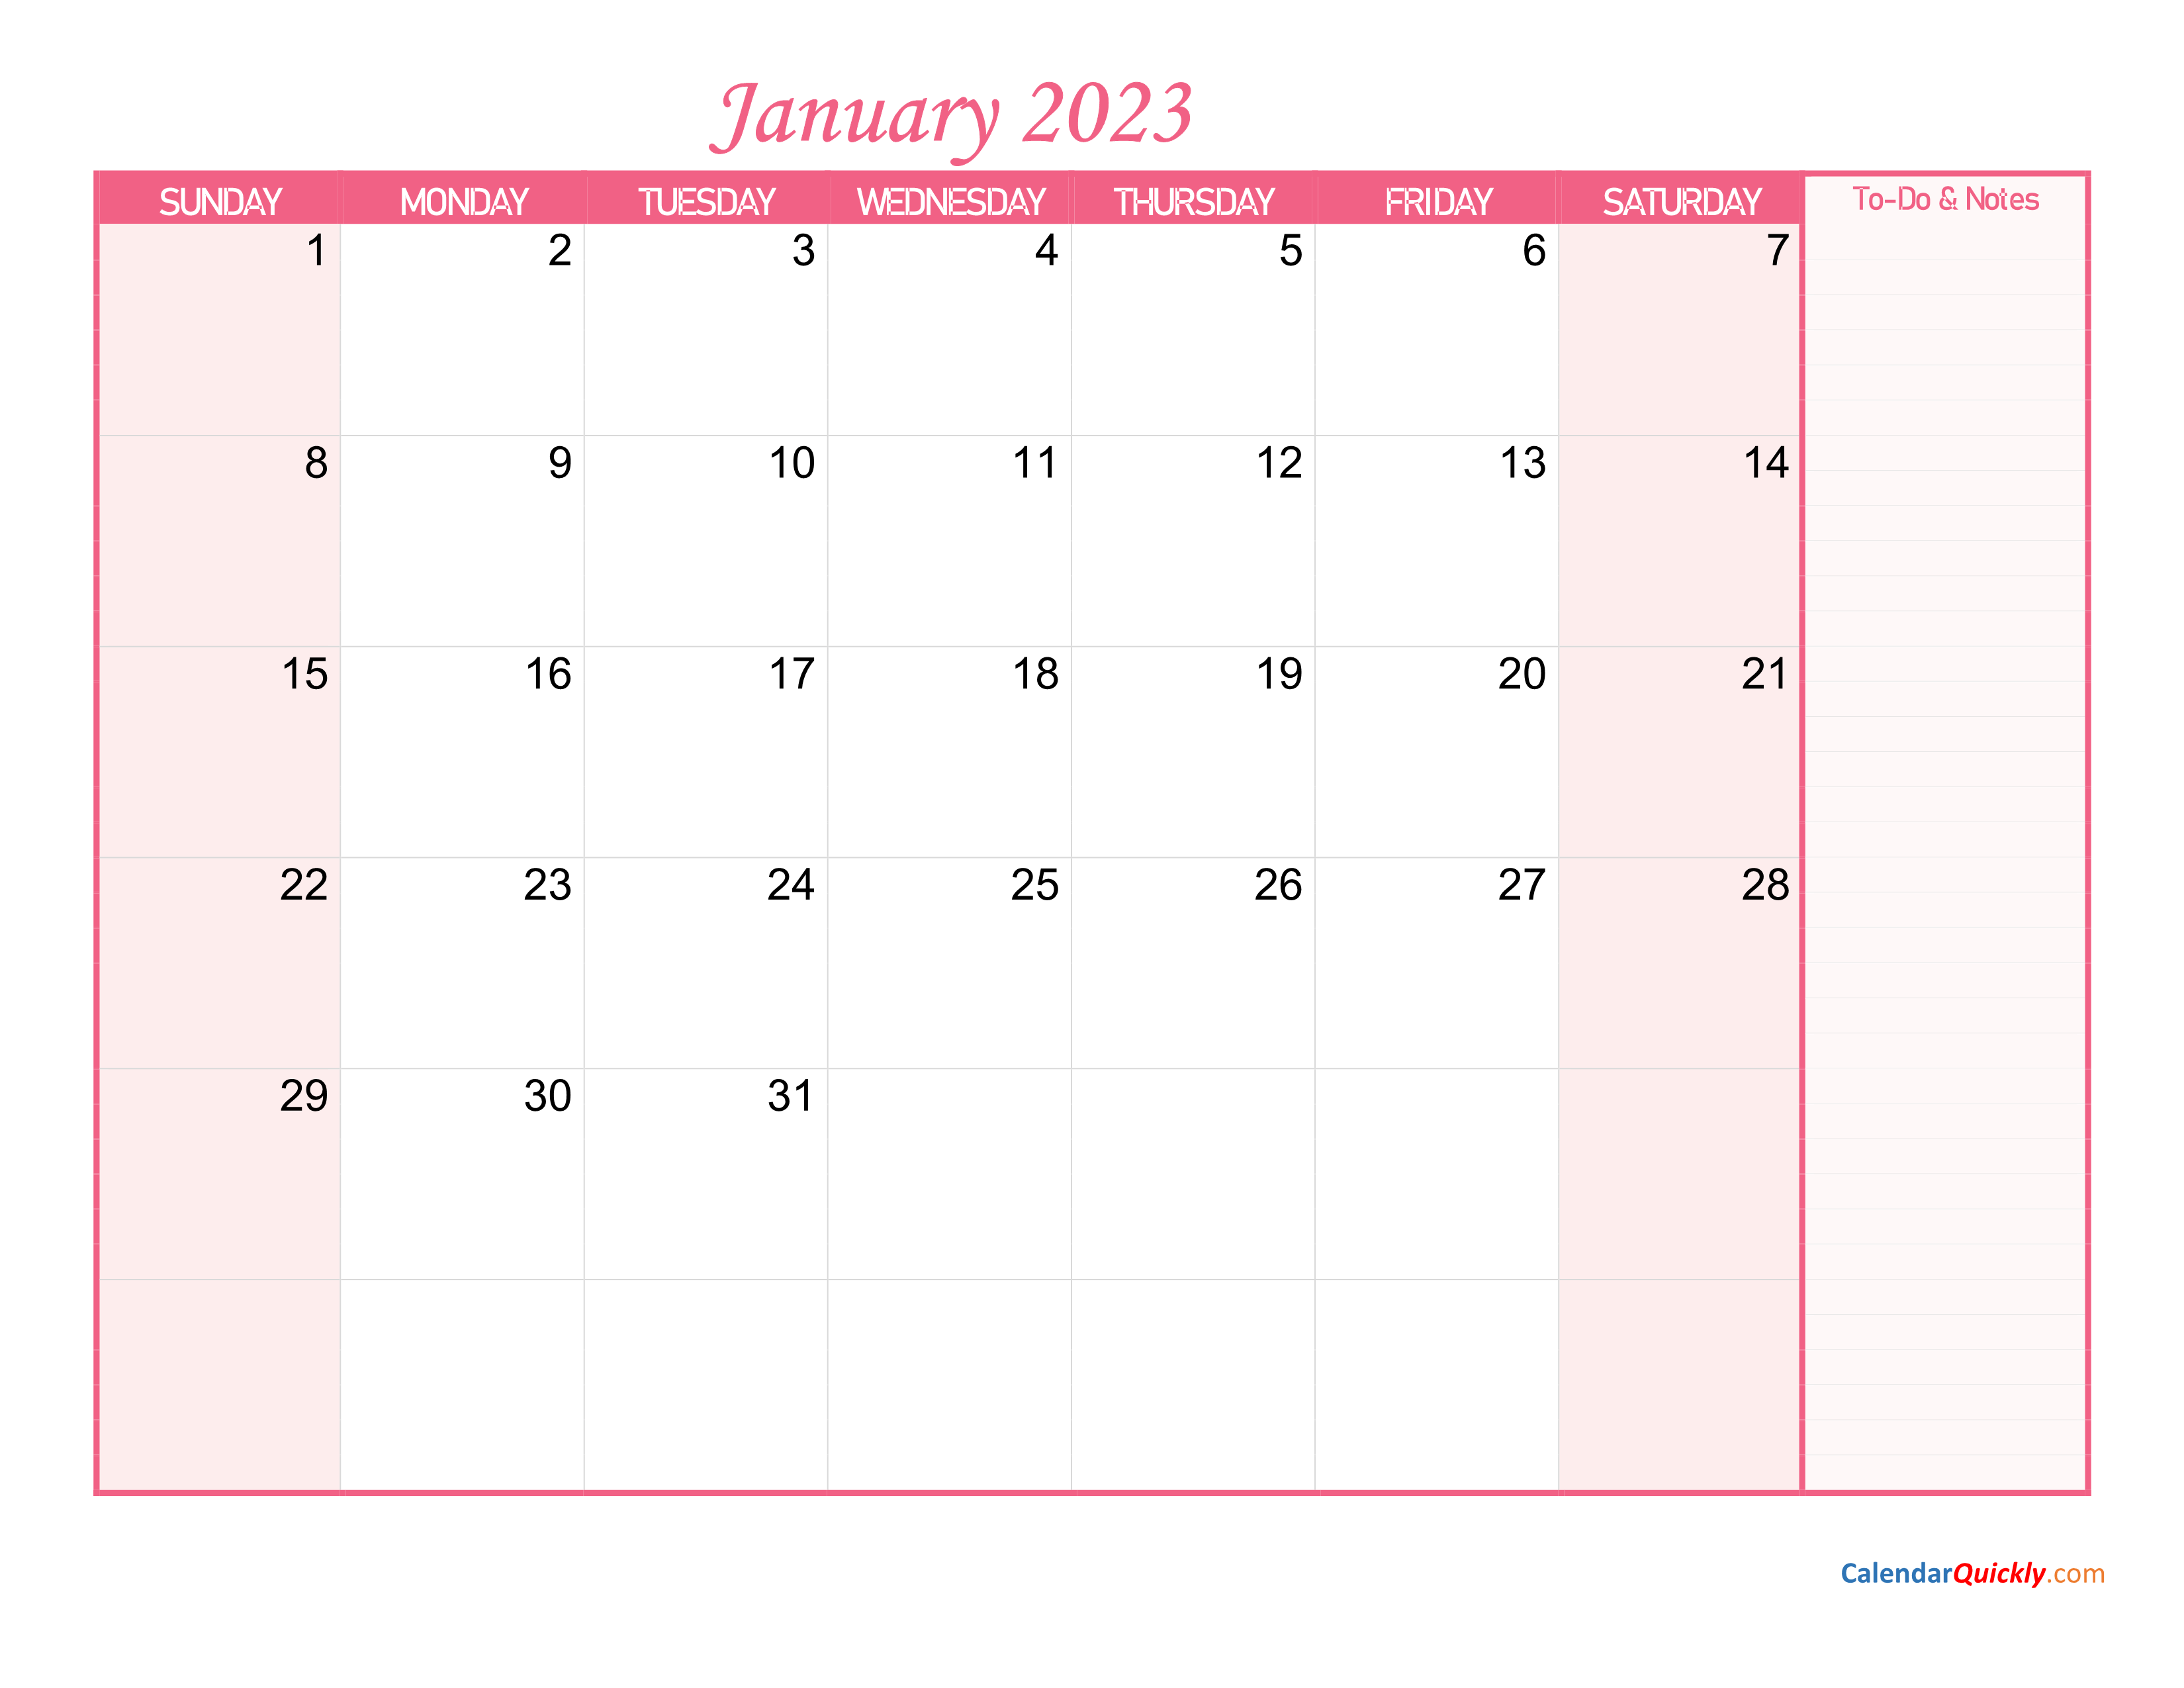 Monthly Calendar 2023 with Notes | Calendar Quickly